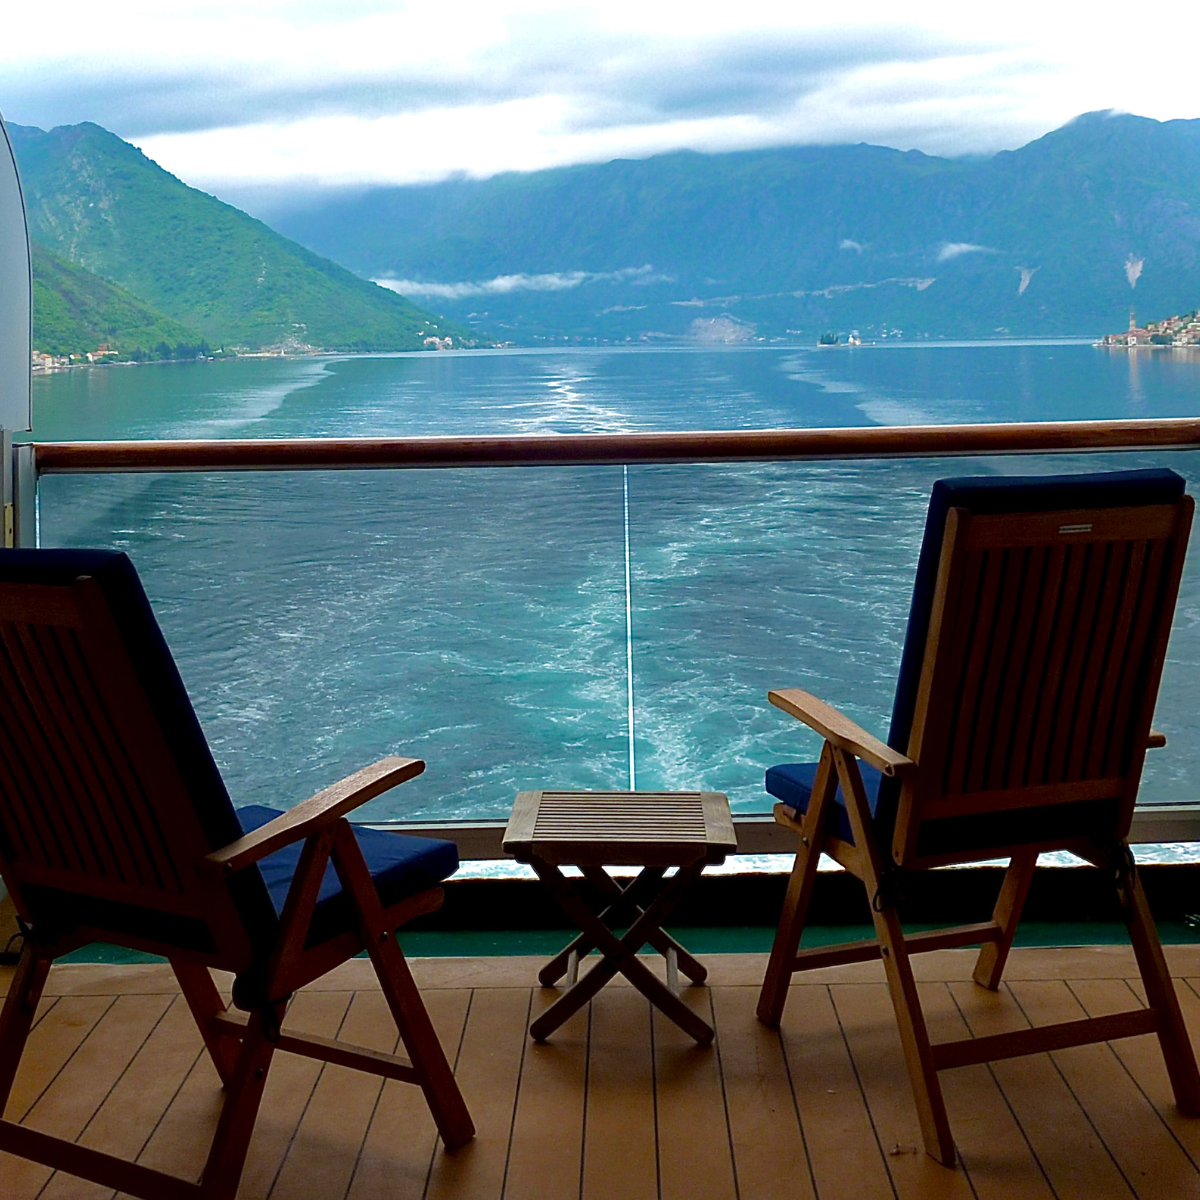 Cruise Ship Balcony with vcire of mountains in background